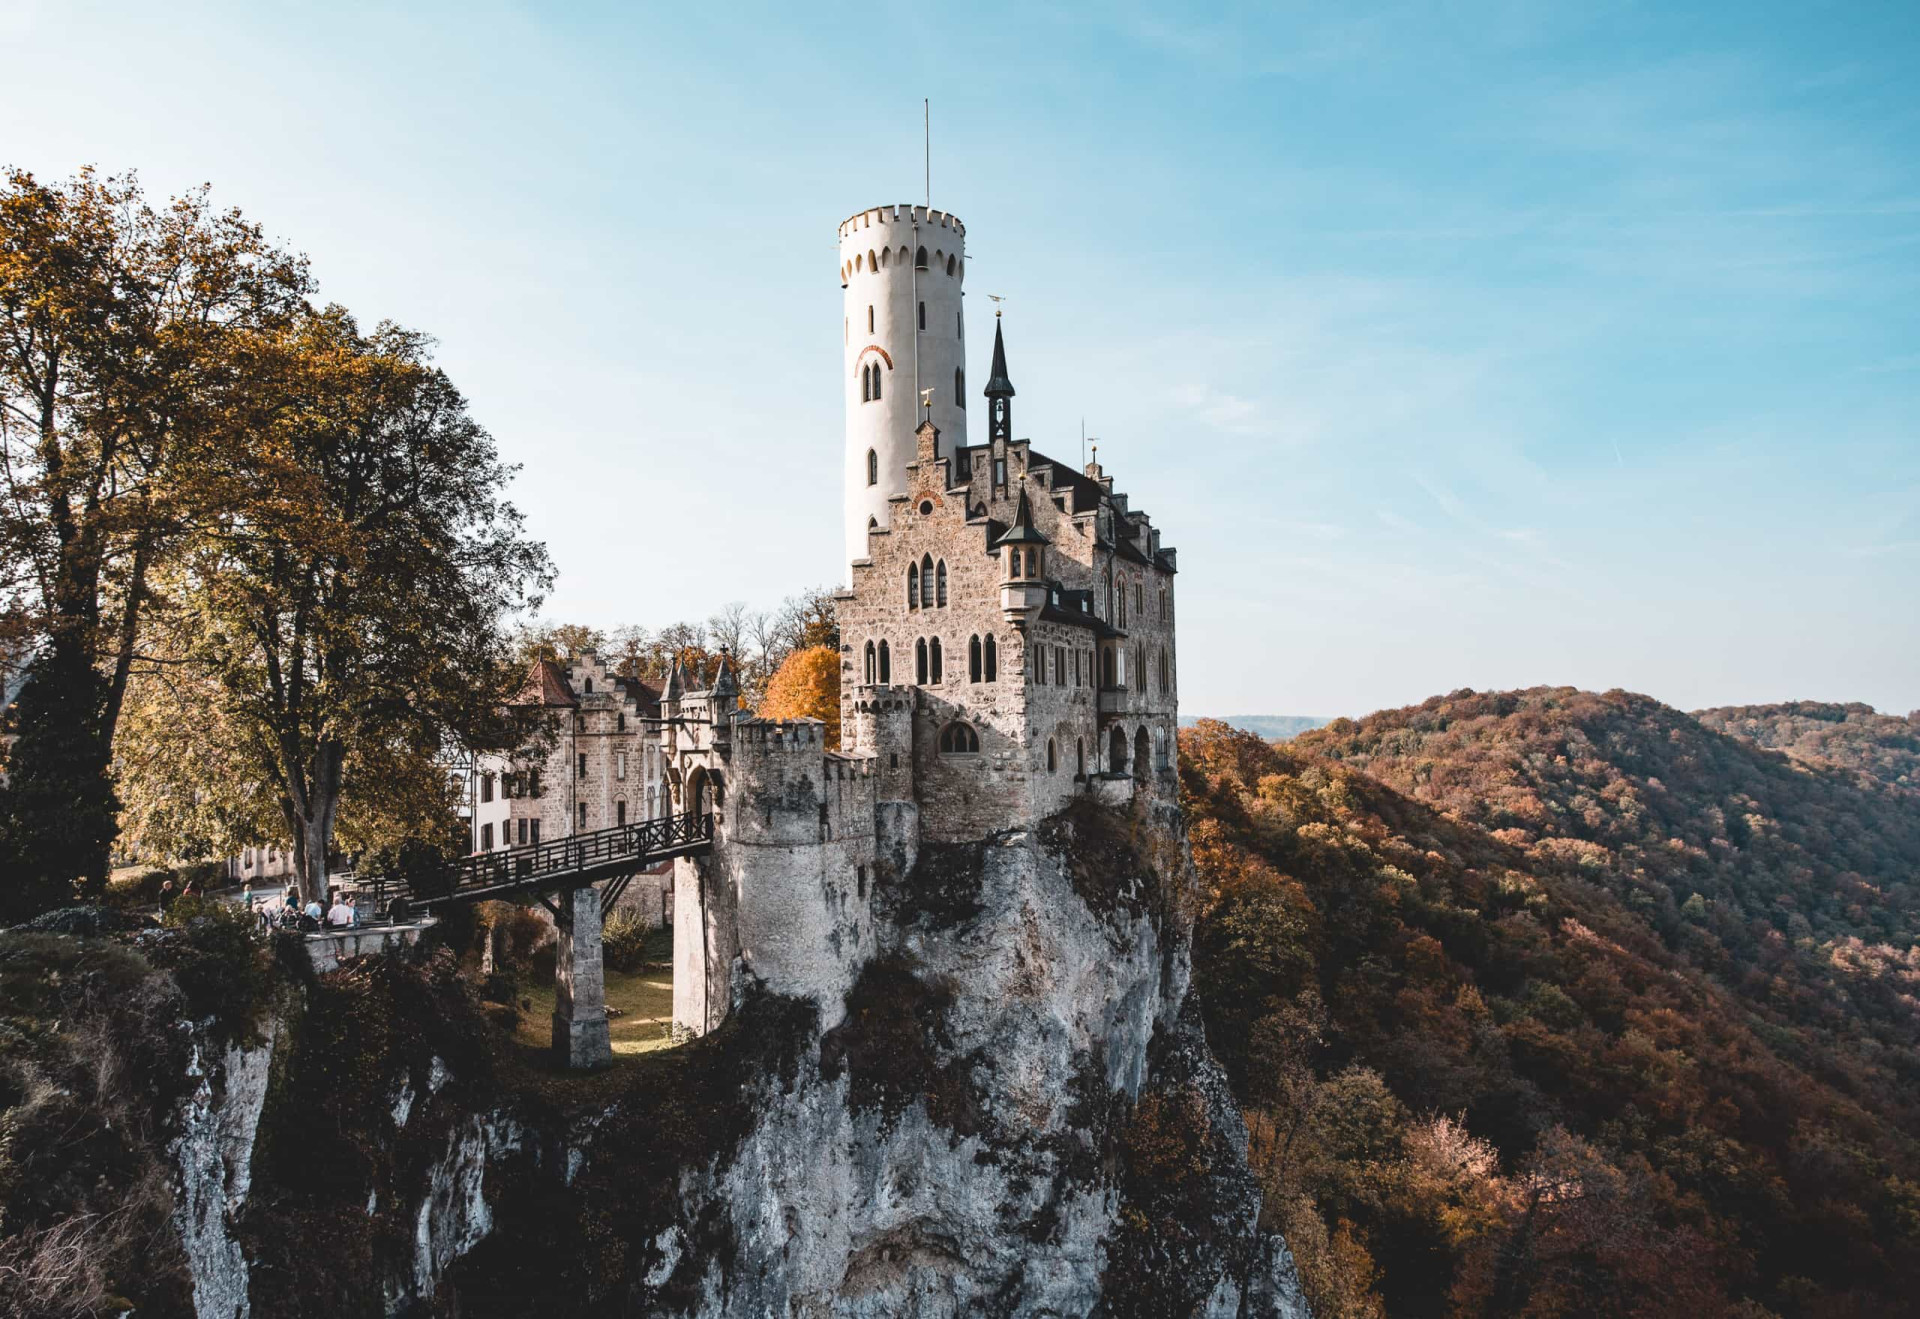 <p>Gaunt-looking Lichtenstein Castle overlooks the Echaz Valley near Honau. It stands near the ruins of a medieval castle and was built in the mid-19th century. Allegedly haunted, the castle is one of the area's most popular tourist attractions.</p><p><a href="https://www.msn.com/en-us/community/channel/vid-7xx8mnucu55yw63we9va2gwr7uihbxwc68fxqp25x6tg4ftibpra?cvid=94631541bc0f4f89bfd59158d696ad7e">Follow us and access great exclusive content every day</a></p>